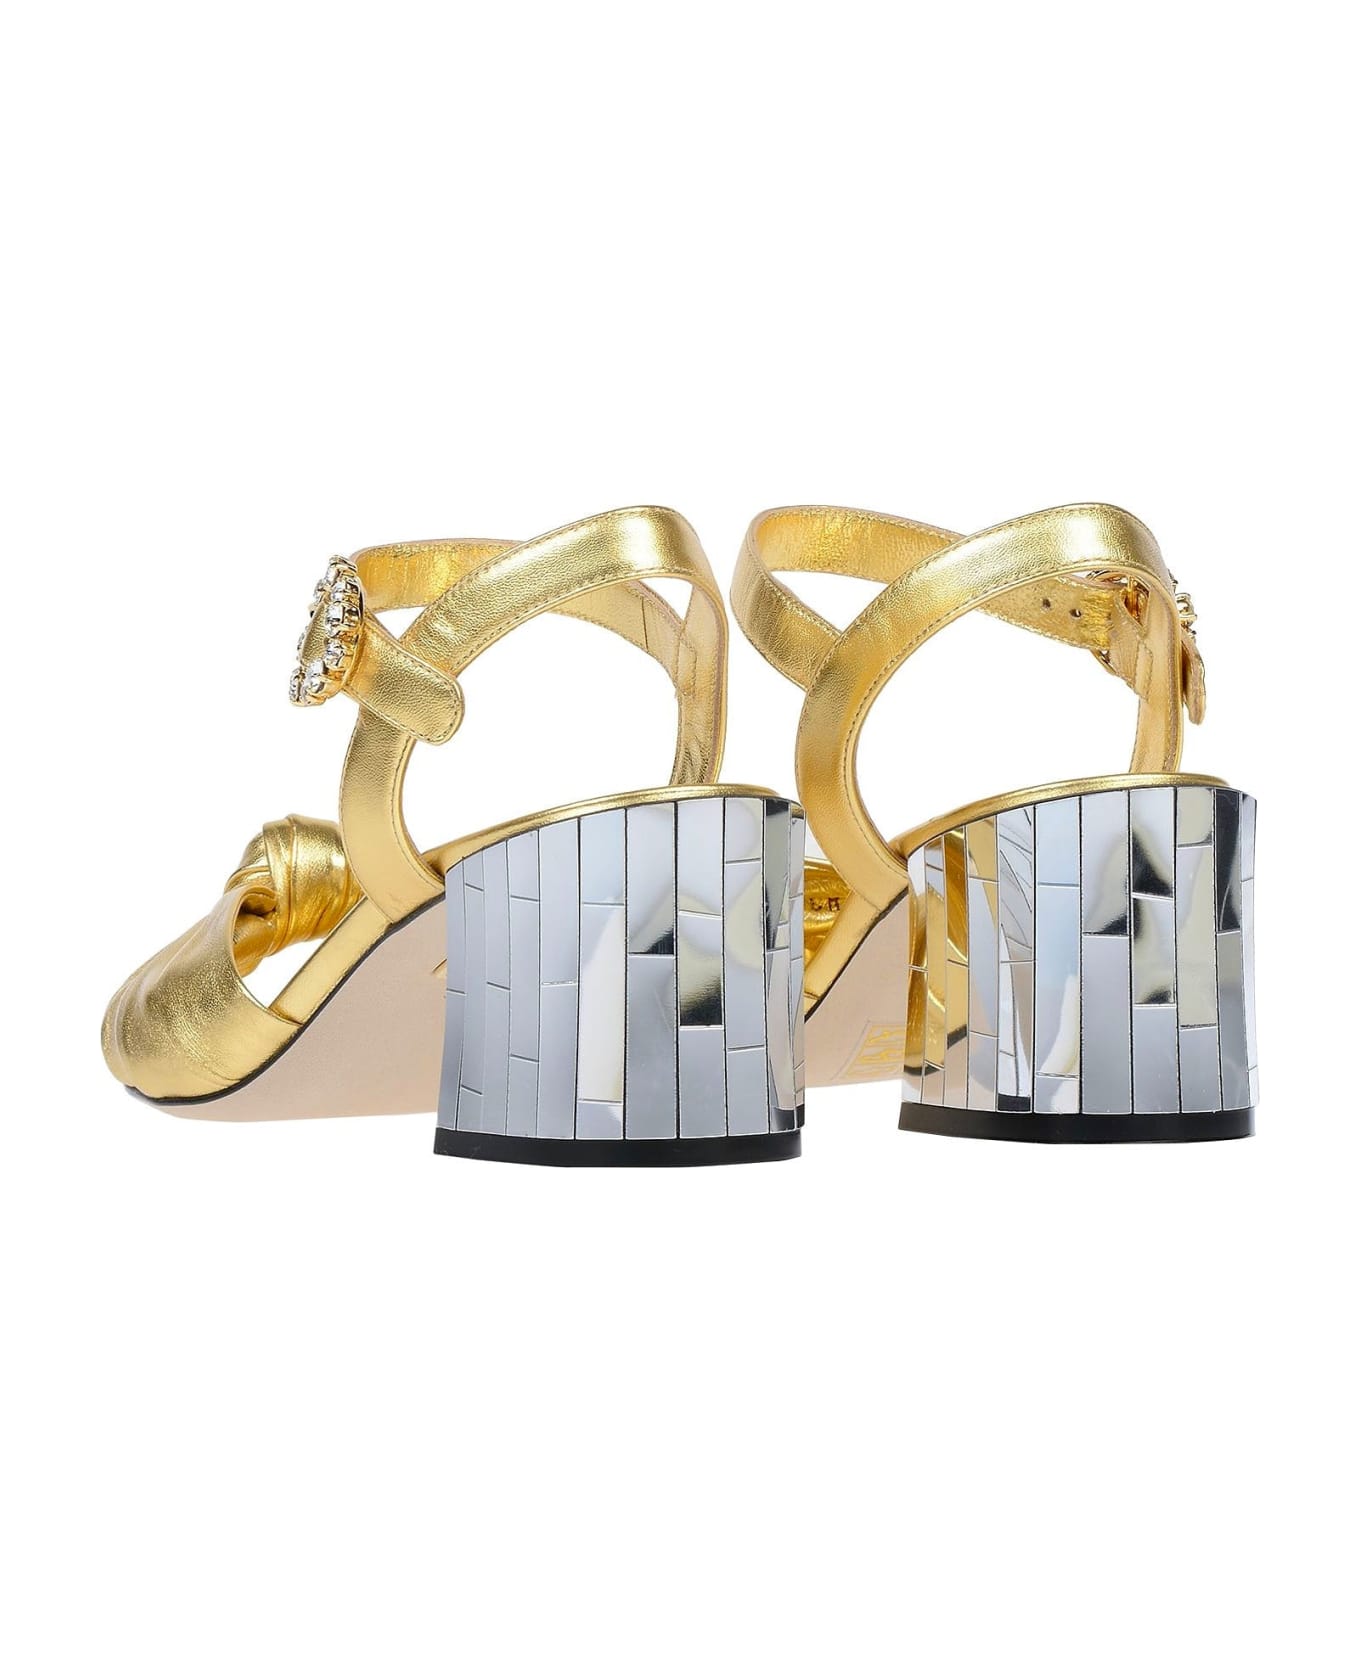 Dolce & Gabbana Keira Leather Sandals - Gold